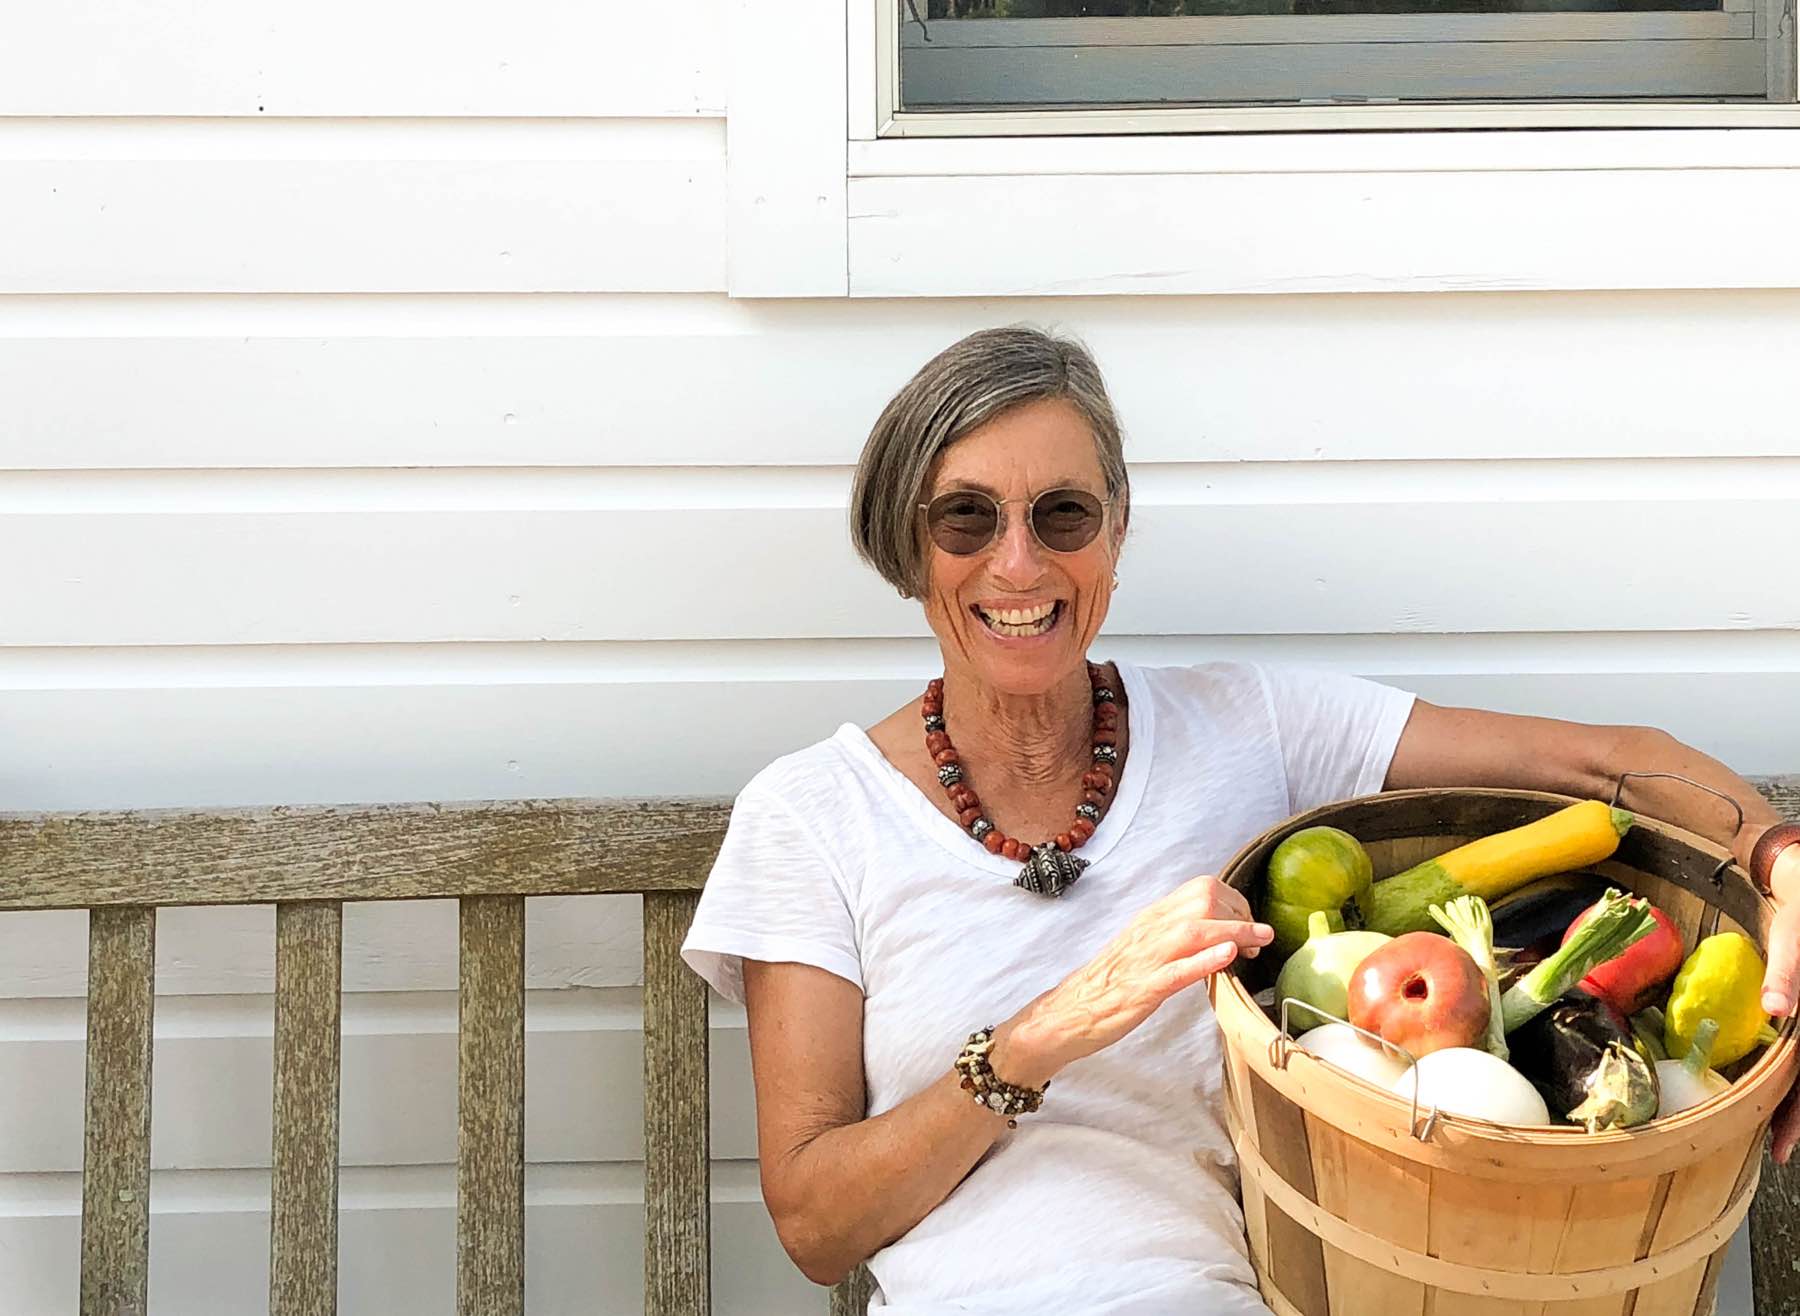 Woman on bench in front of white clapboard holding a basket of summer vegetables, White Gate Farm